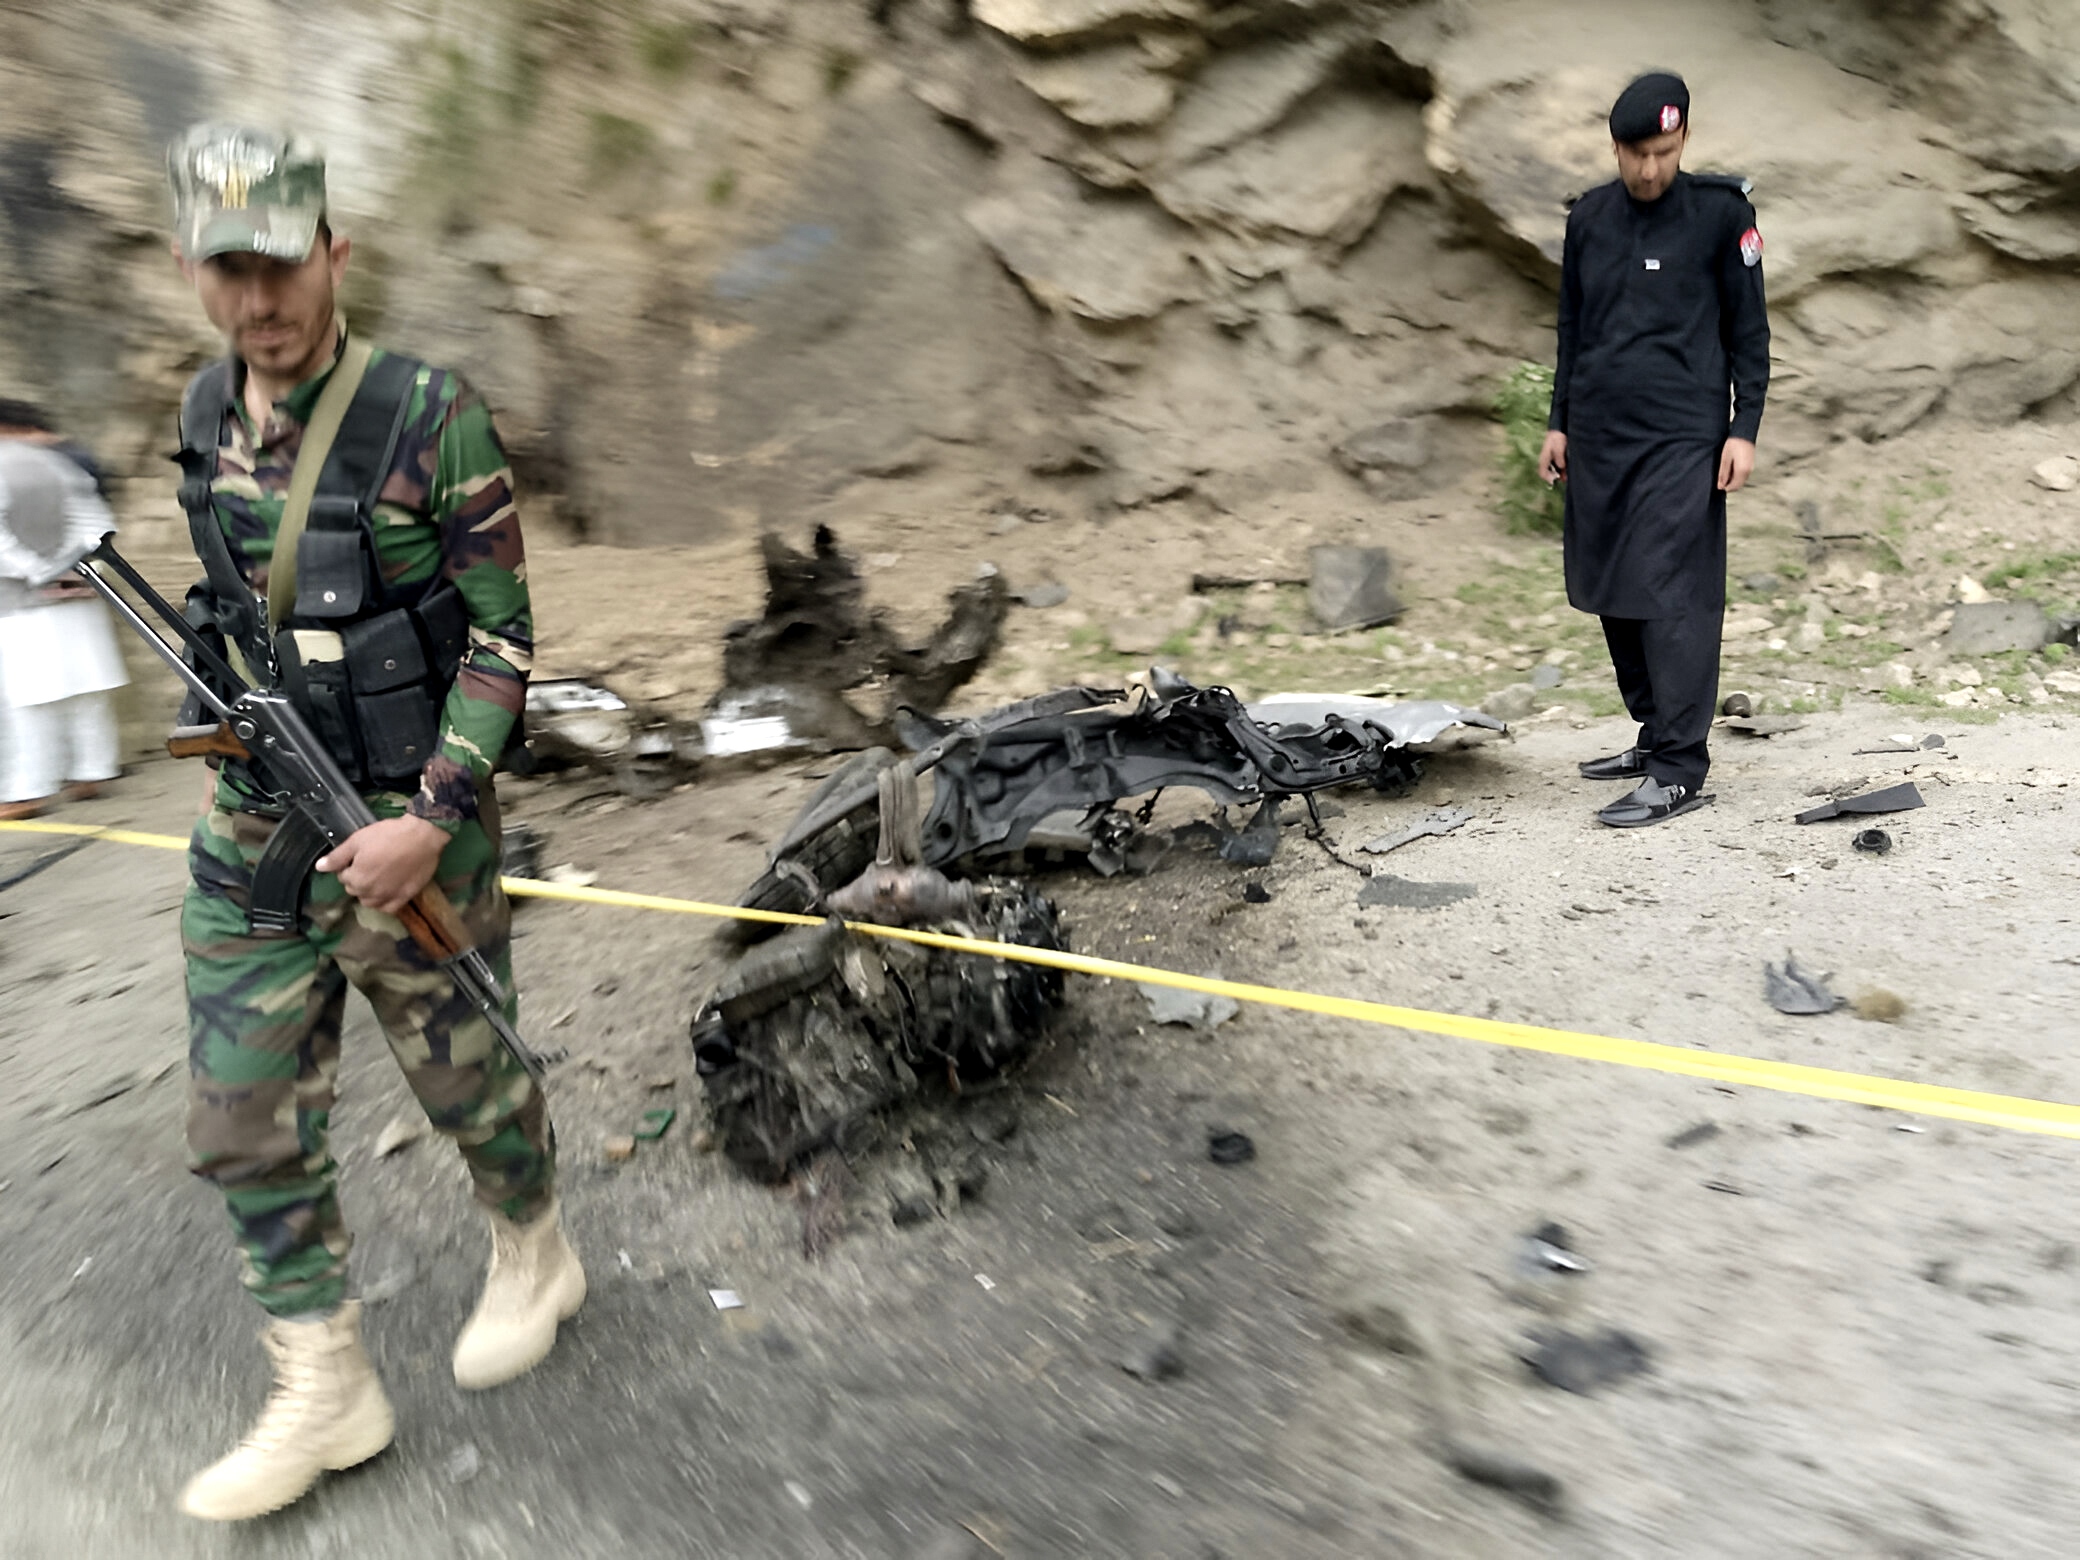 Five Chinese nationals and one Pakistani was killed in a suicide attack on March 26 in Pakistan's northern area.